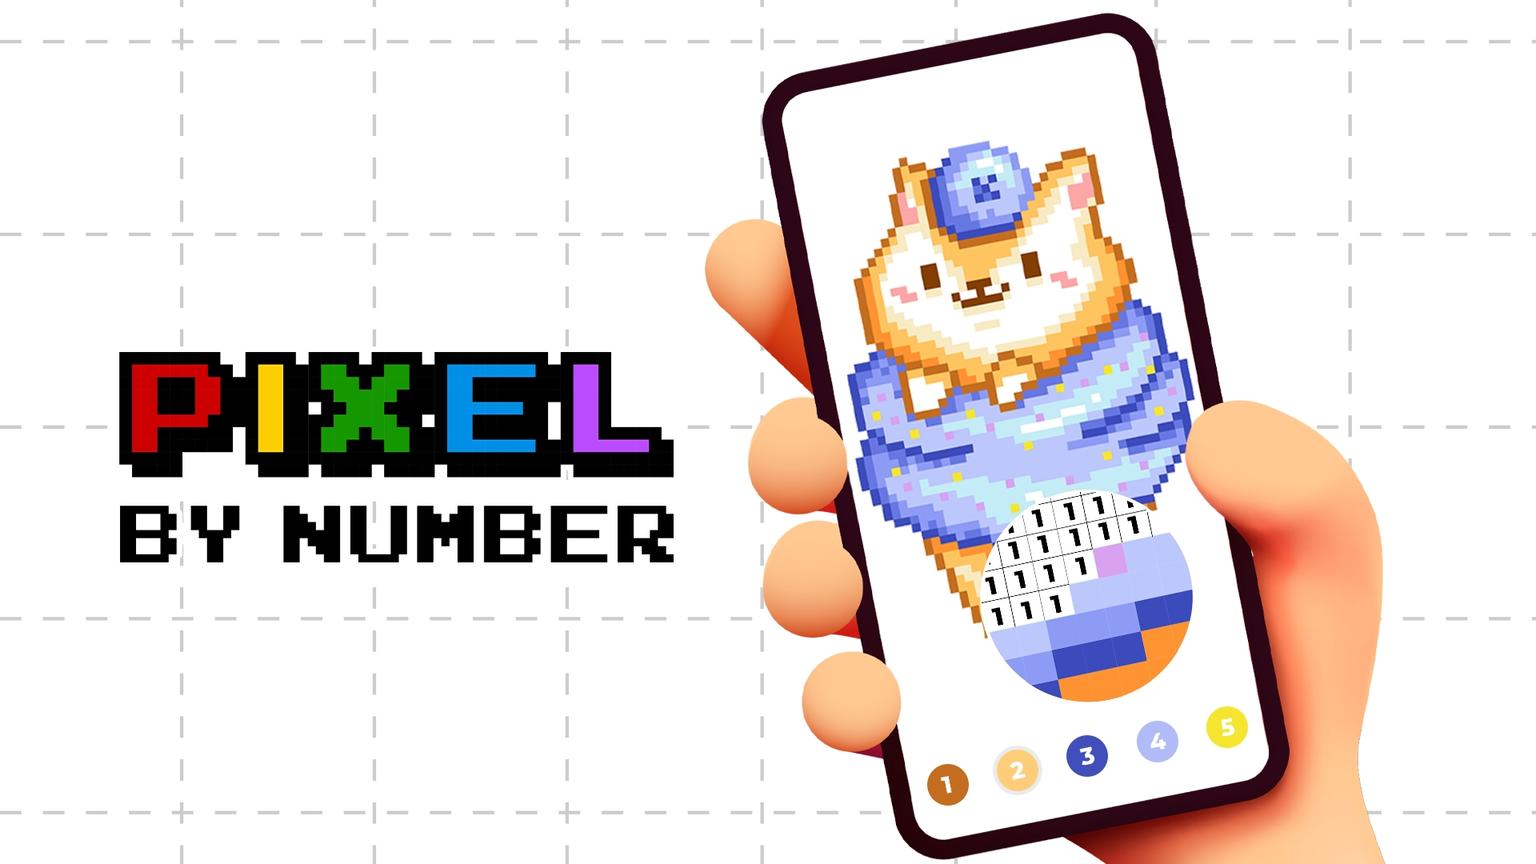 Pixel by number